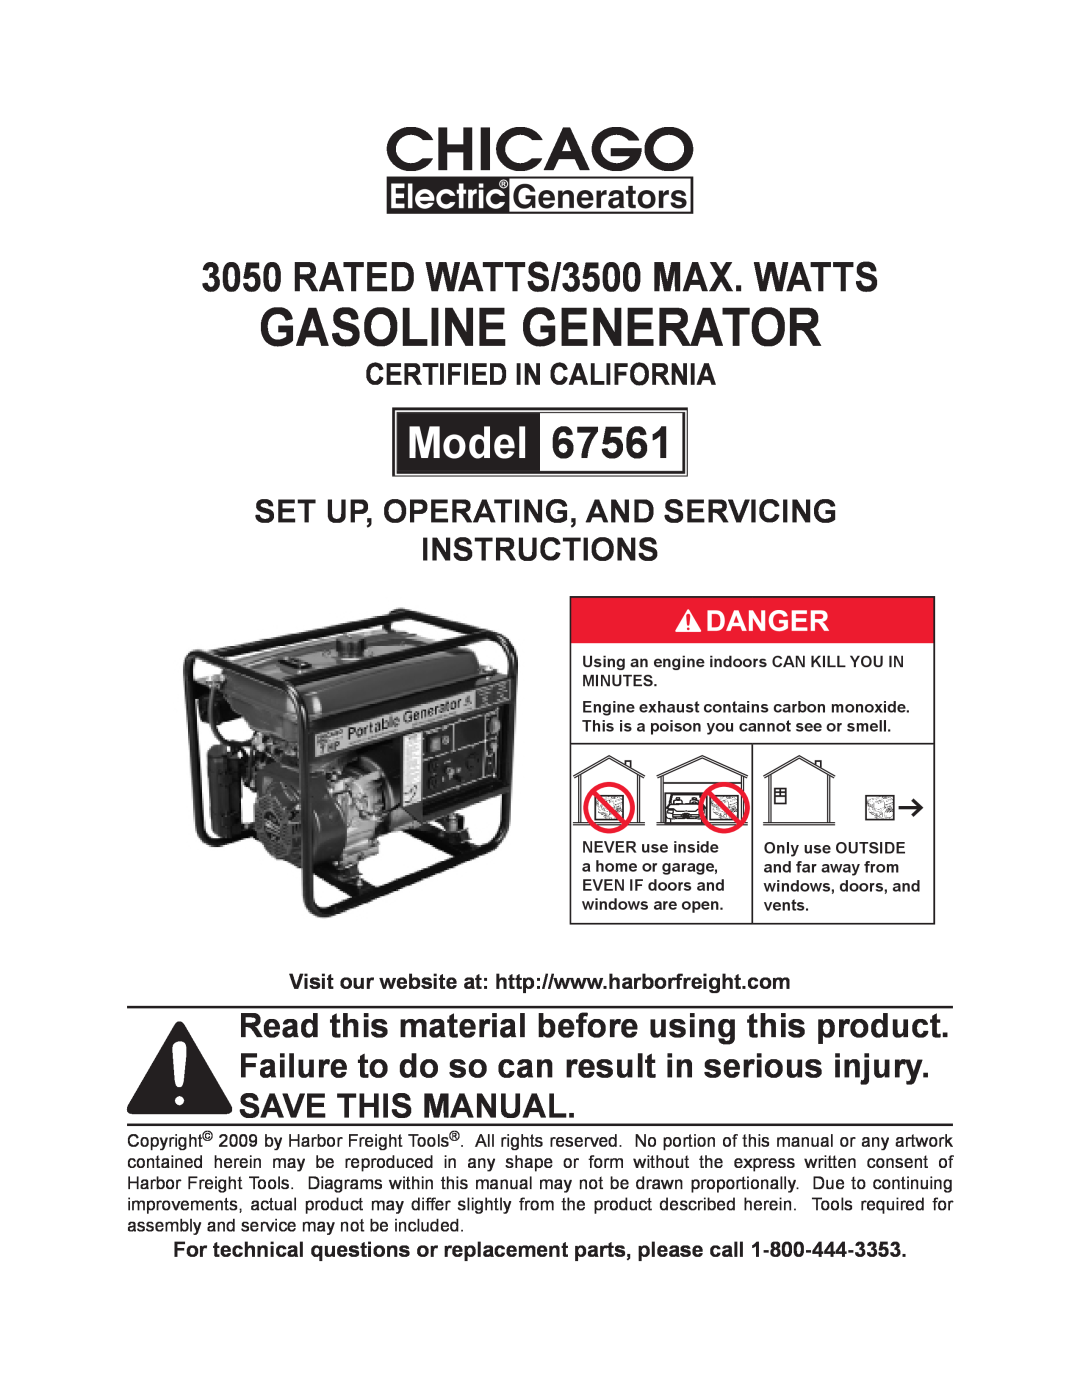 Chicago Electric 67561 manual Gasoline generator, Model, RATED Watts/3500 MAX. watts, Certified in California 